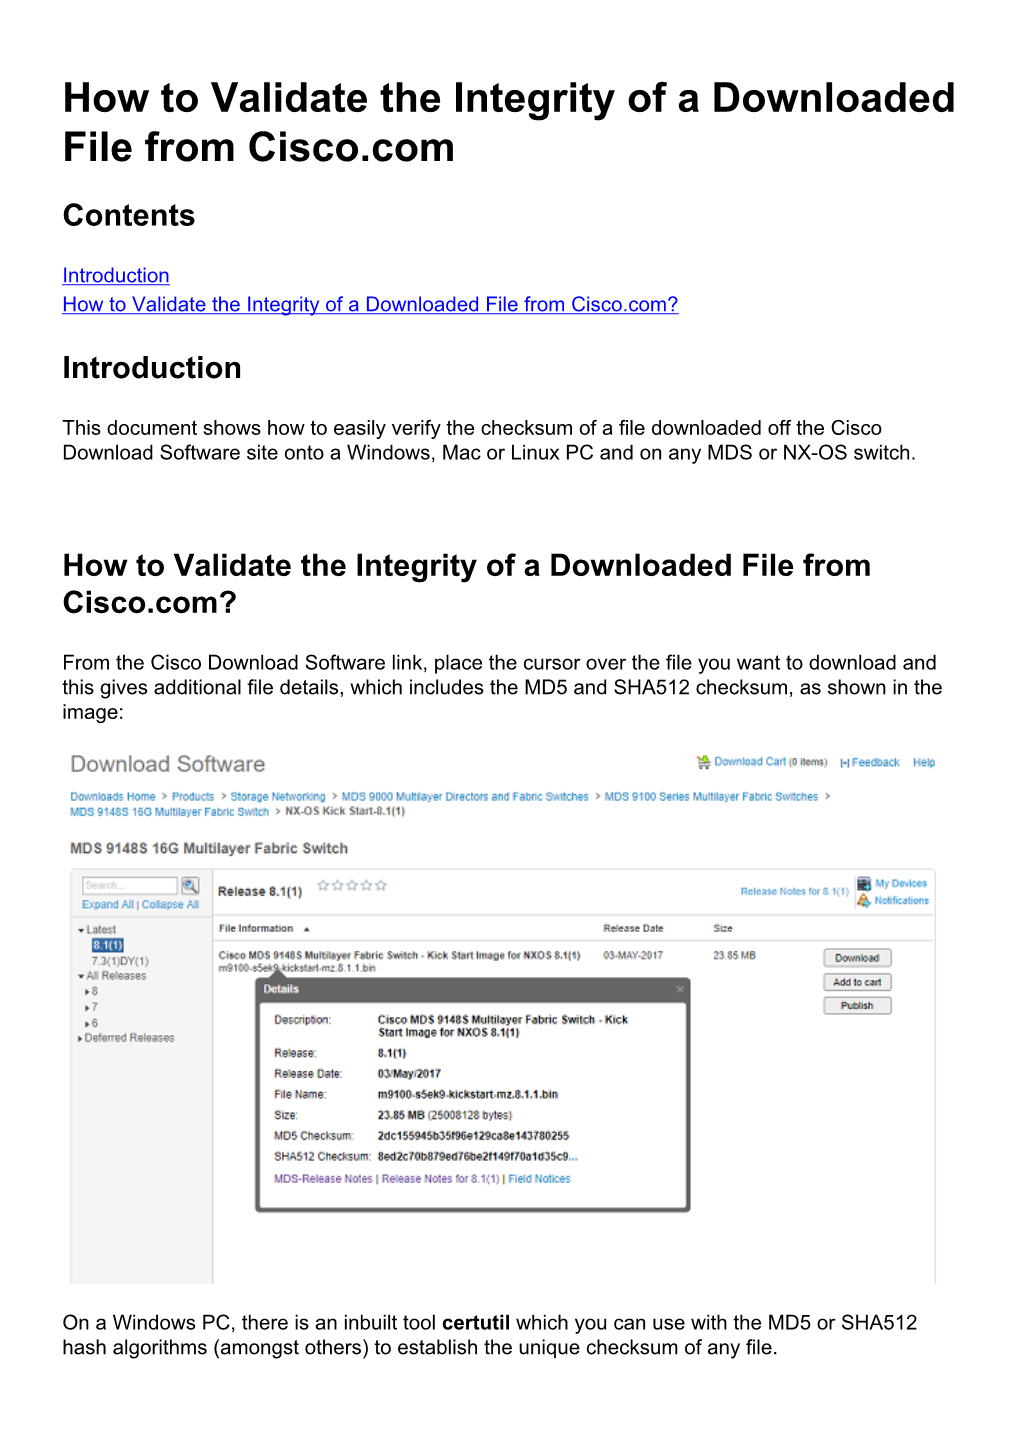 How to Validate the Integrity of a Downloaded File from Cisco.Com